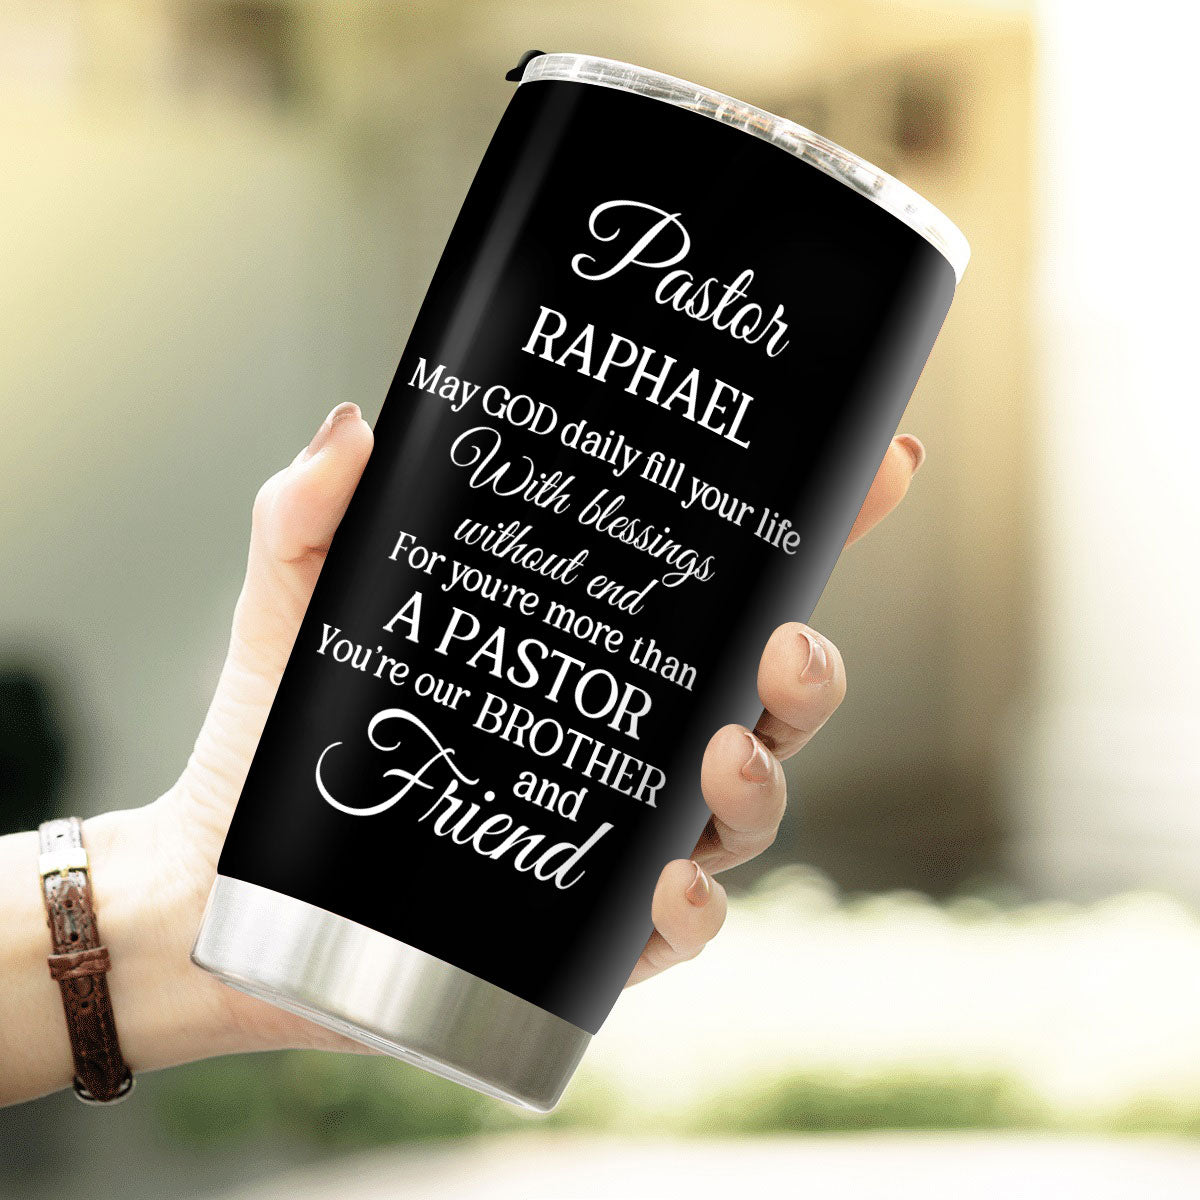 Pretty Personalized Stainless Steel Tumbler 20oz - You Are The Woman O -  Jesuspirit